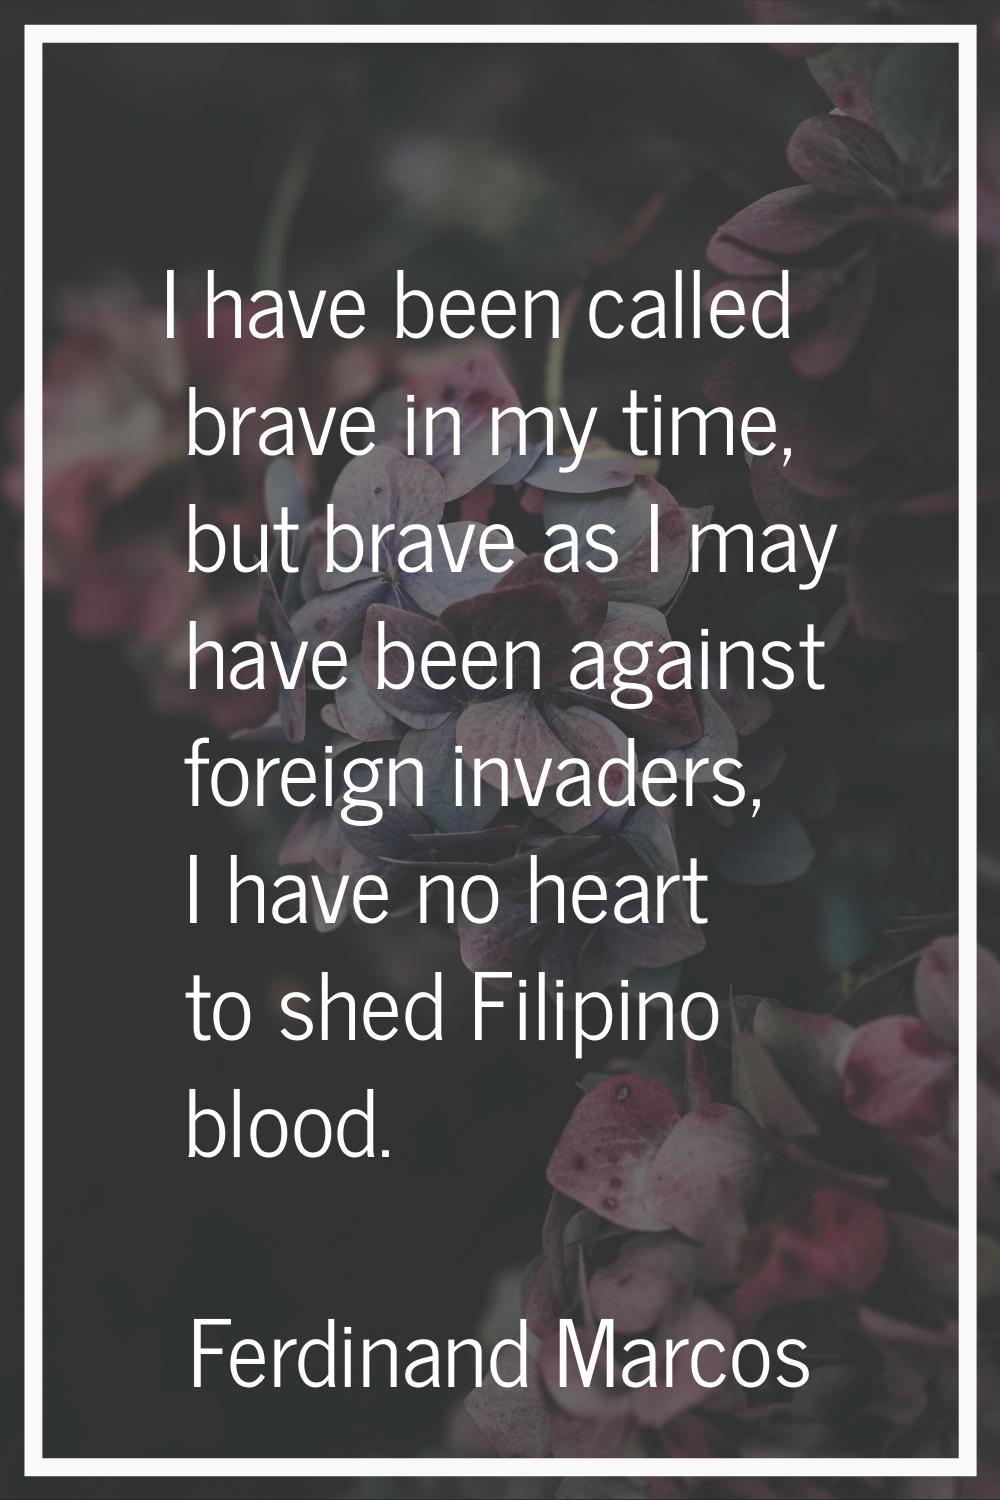 I have been called brave in my time, but brave as I may have been against foreign invaders, I have 